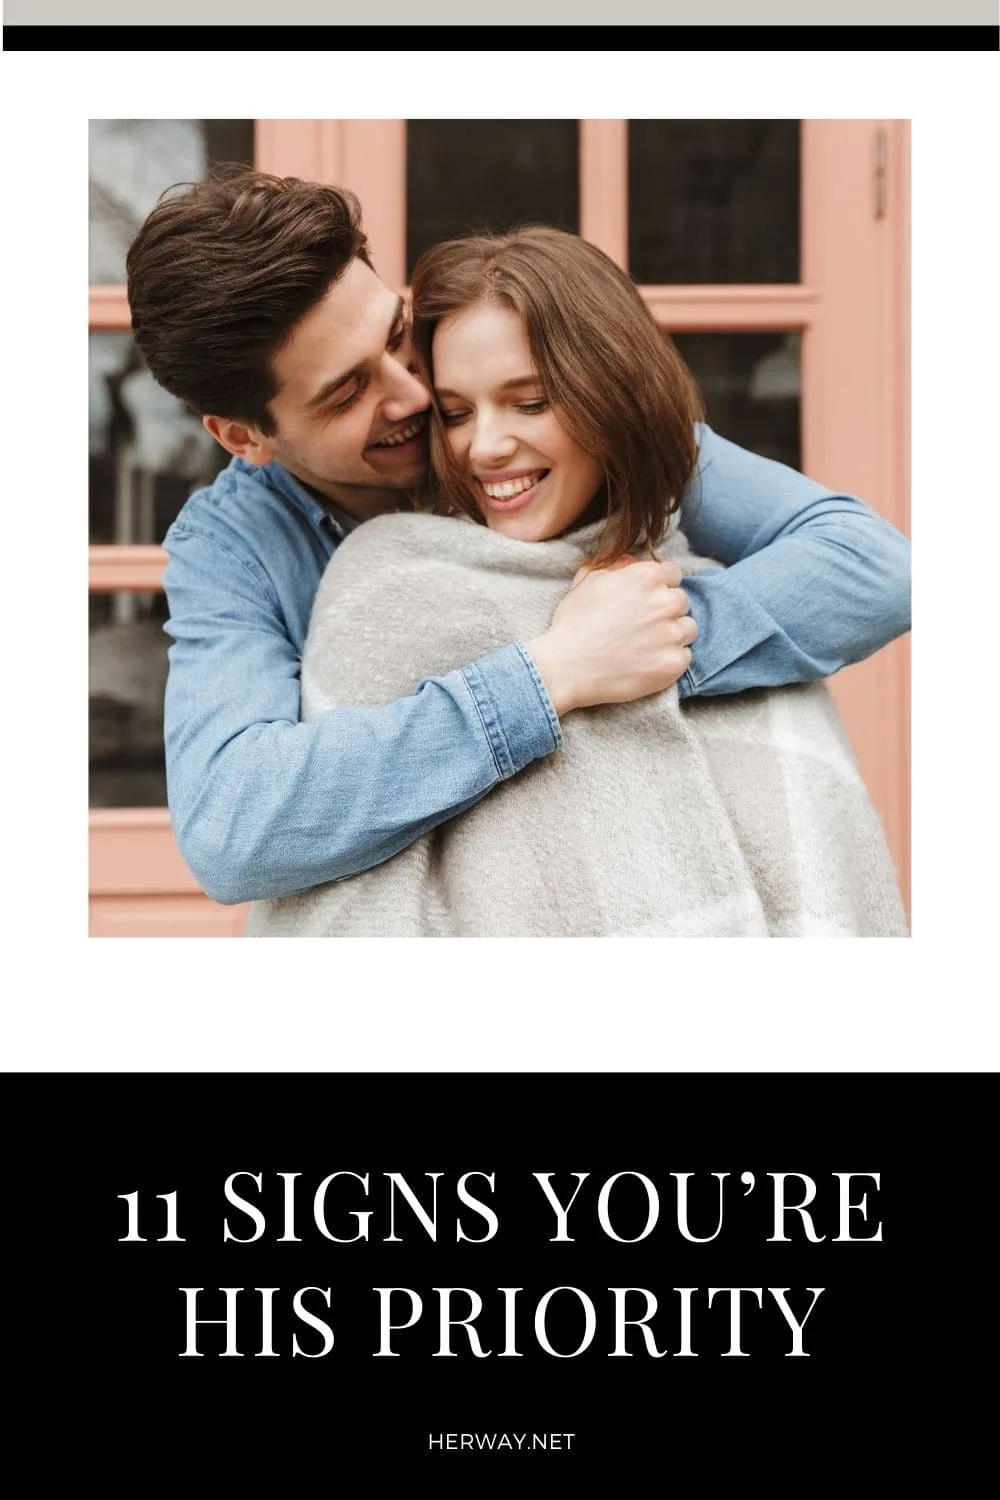 11 Signs You’re His Priority